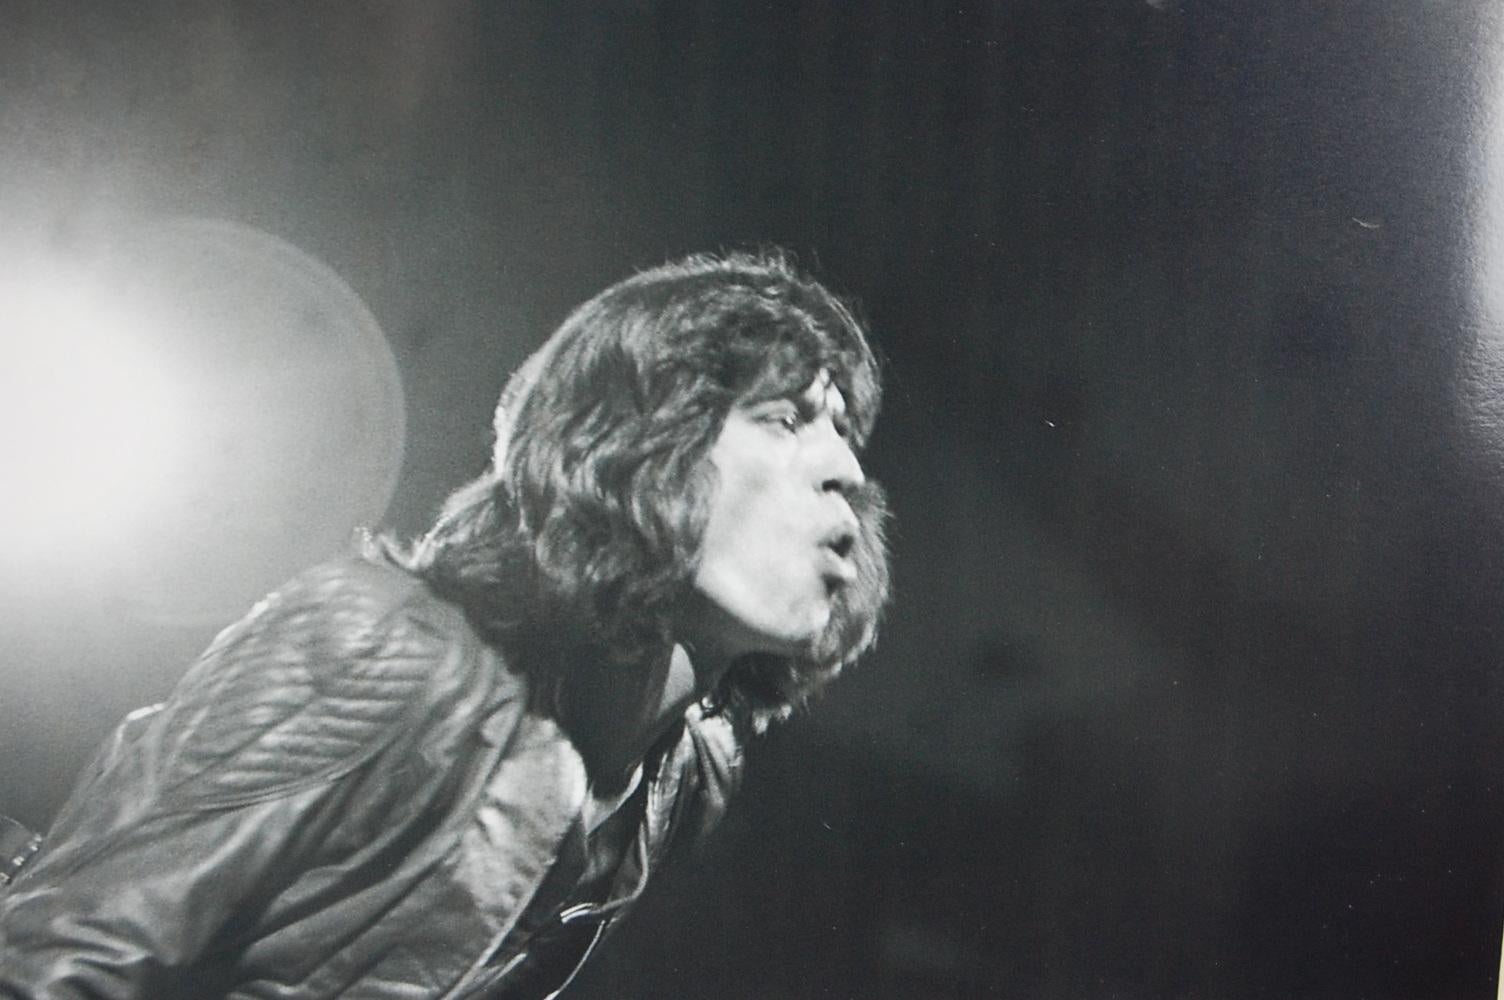 Jagger on Stage
Framed photograph by Freddy Warren of Rolling Stone Mick Jagger on stage. Action Shot London. Circa 1970.
From original negatives of the Freddy Warren Collection.
Professionally Framed.

Freddy Warren.

Freddy became